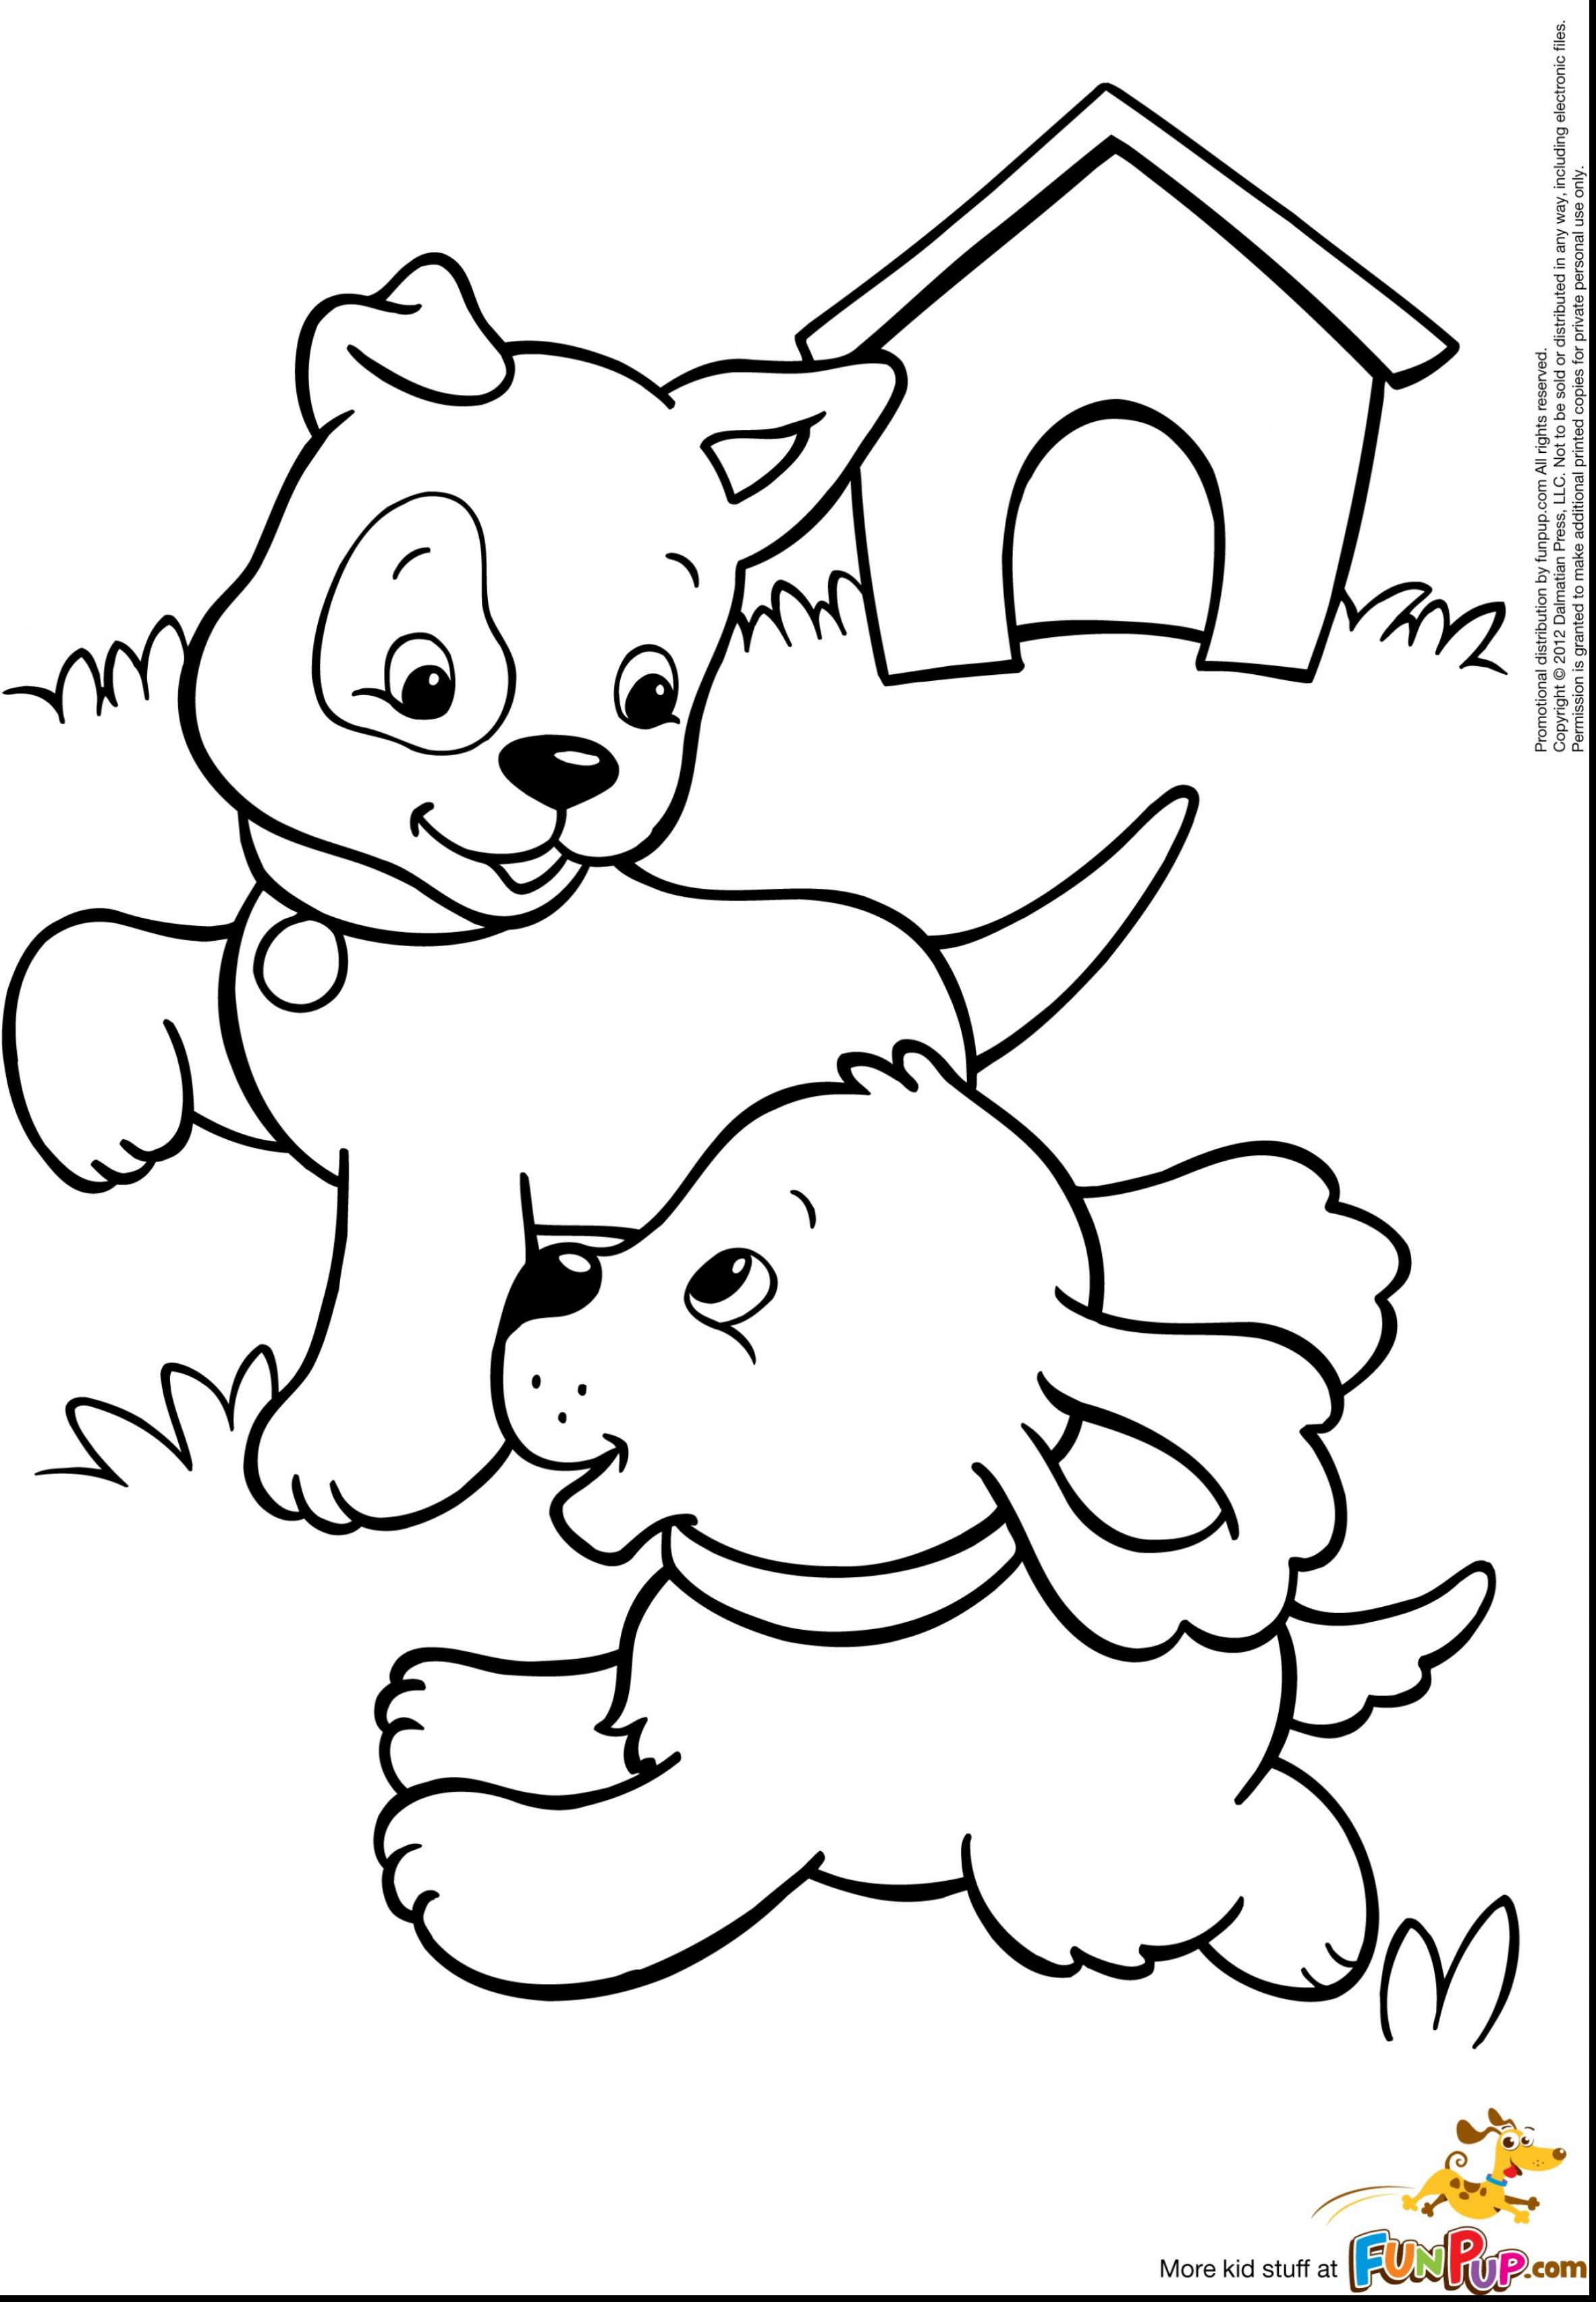 All Kinds Of Dog Coloring Pages That Are Cute